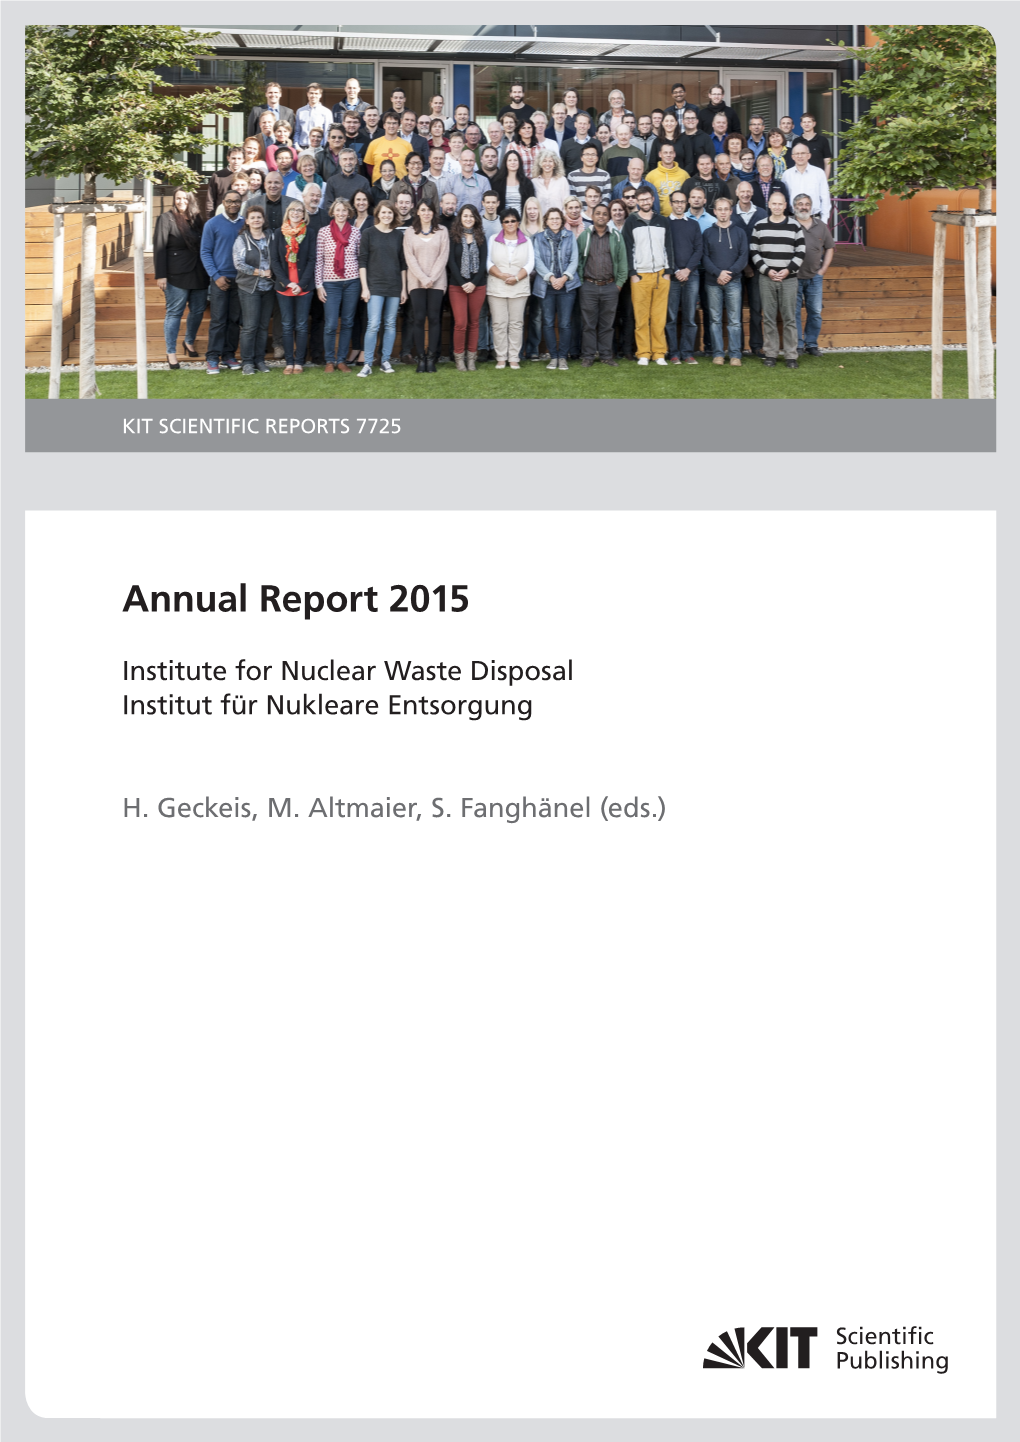 Annual Report 2015 / Institute for Nuclear Waste Disposal. (KIT